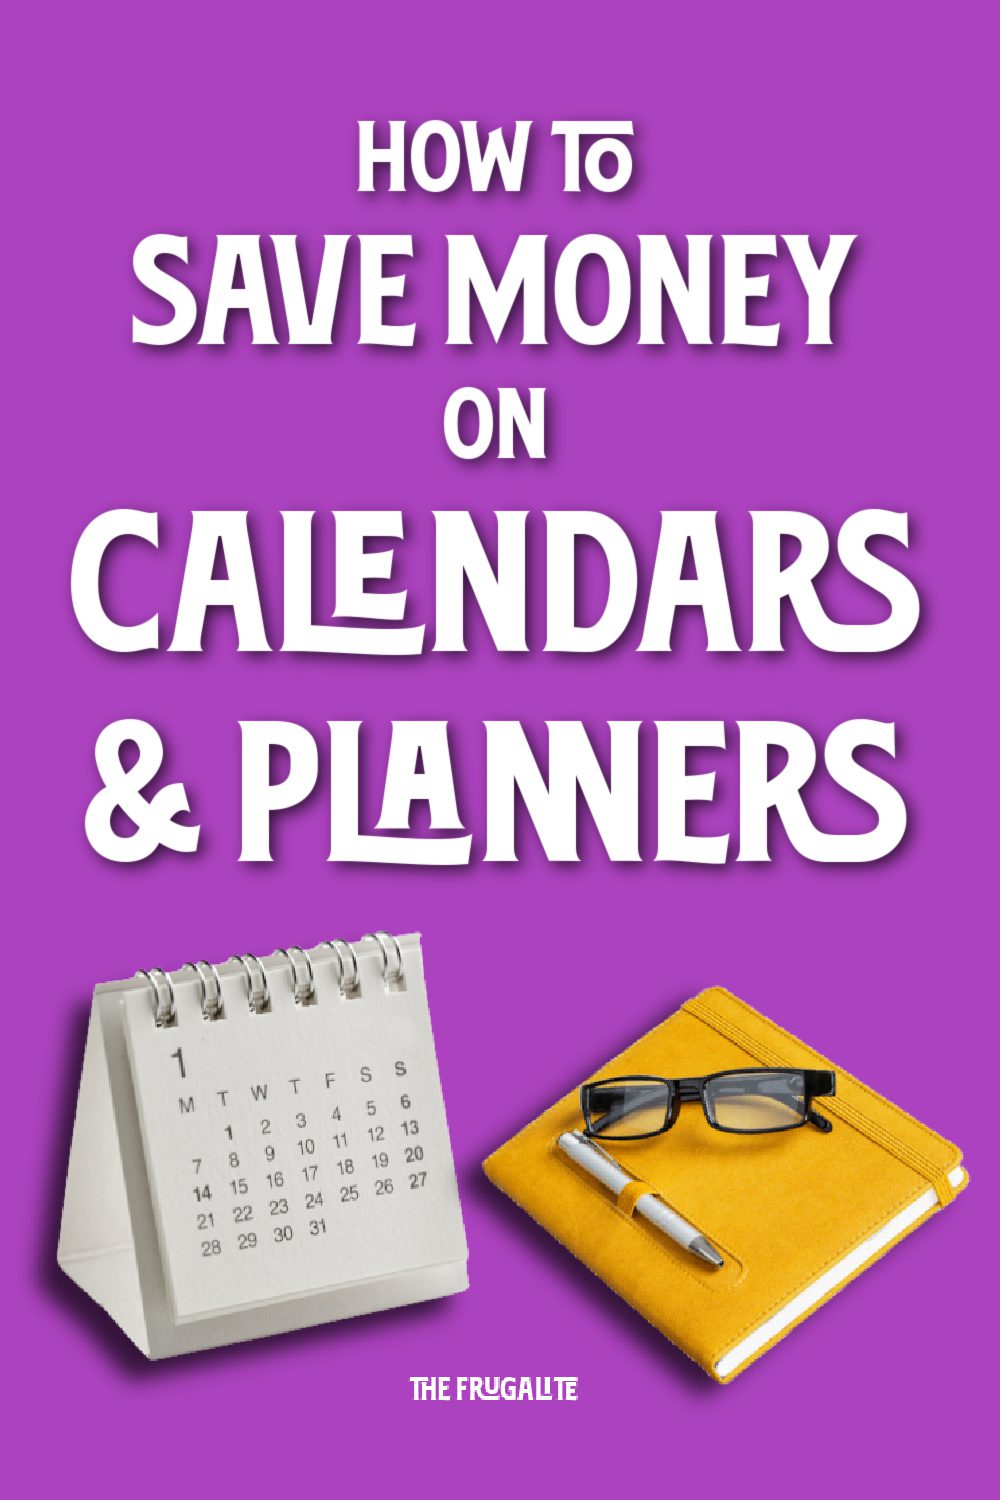 How to Save Money on Calendars and Planners